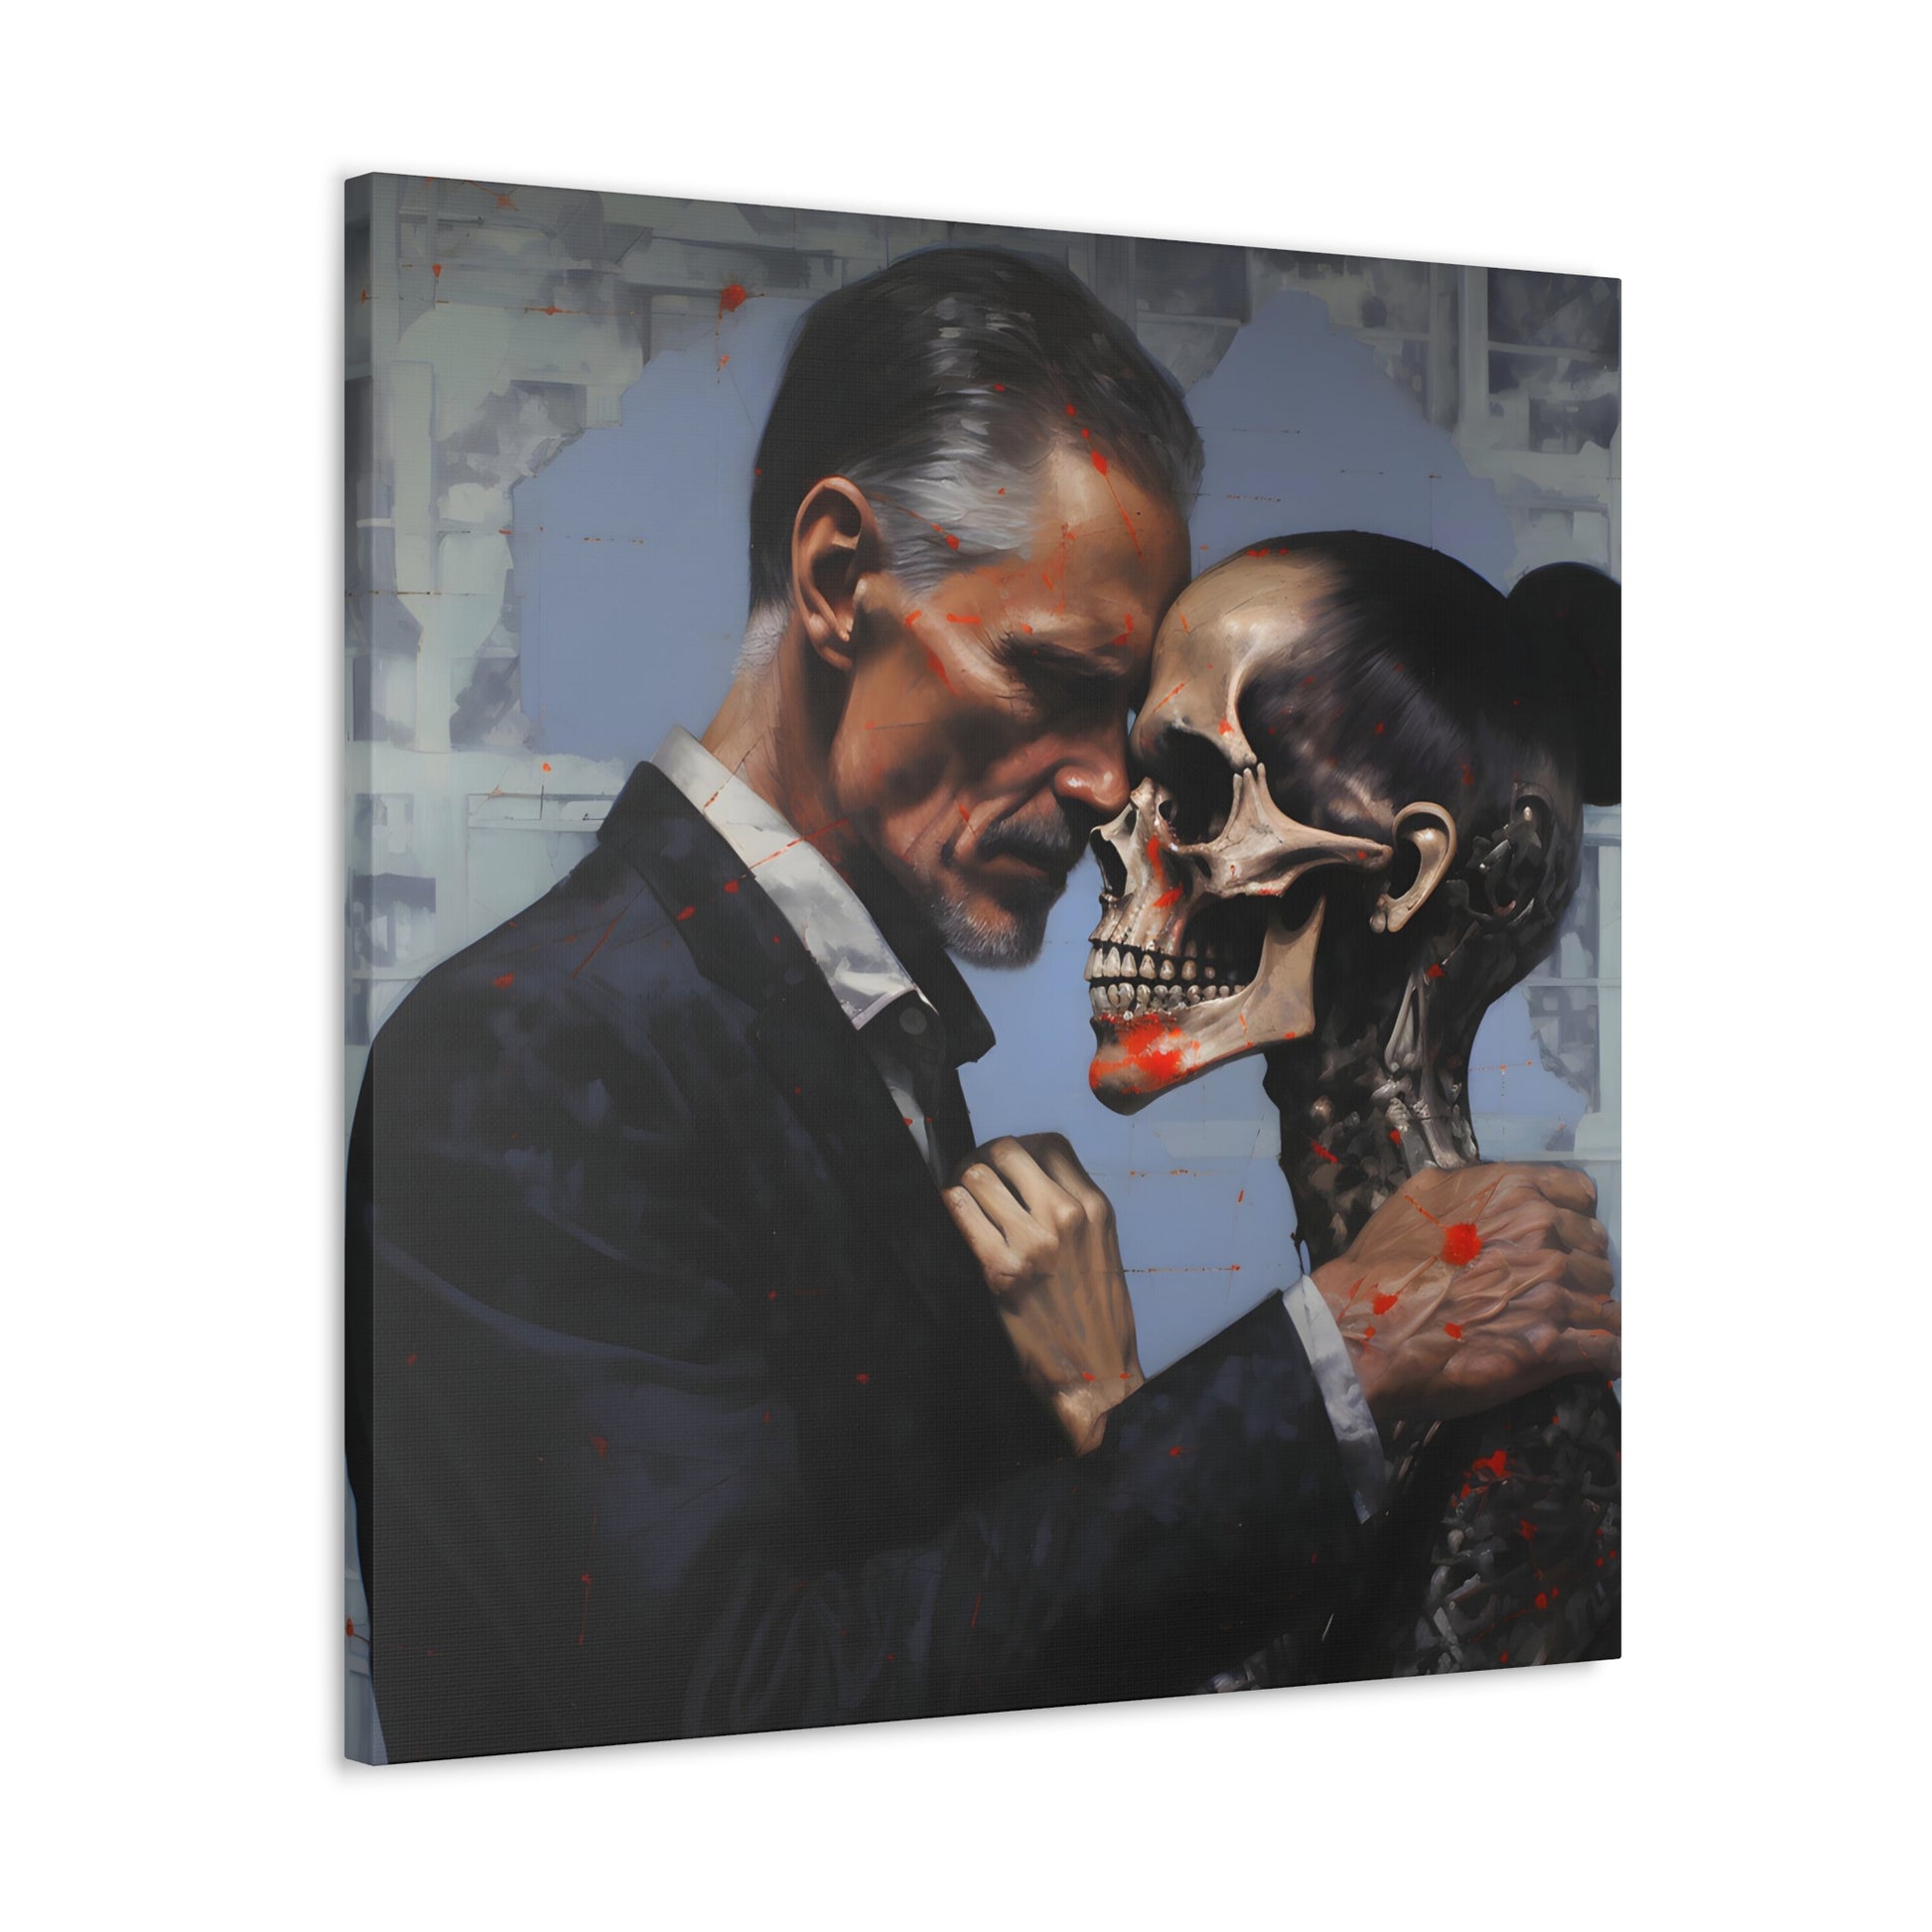 angeled shot Embrace of Mortality', a hyperrealist painting depicting the haunting juxtaposition of love and death, offering a visceral reminder of human fragility, inspired by vanitas art traditions with a modern twist.